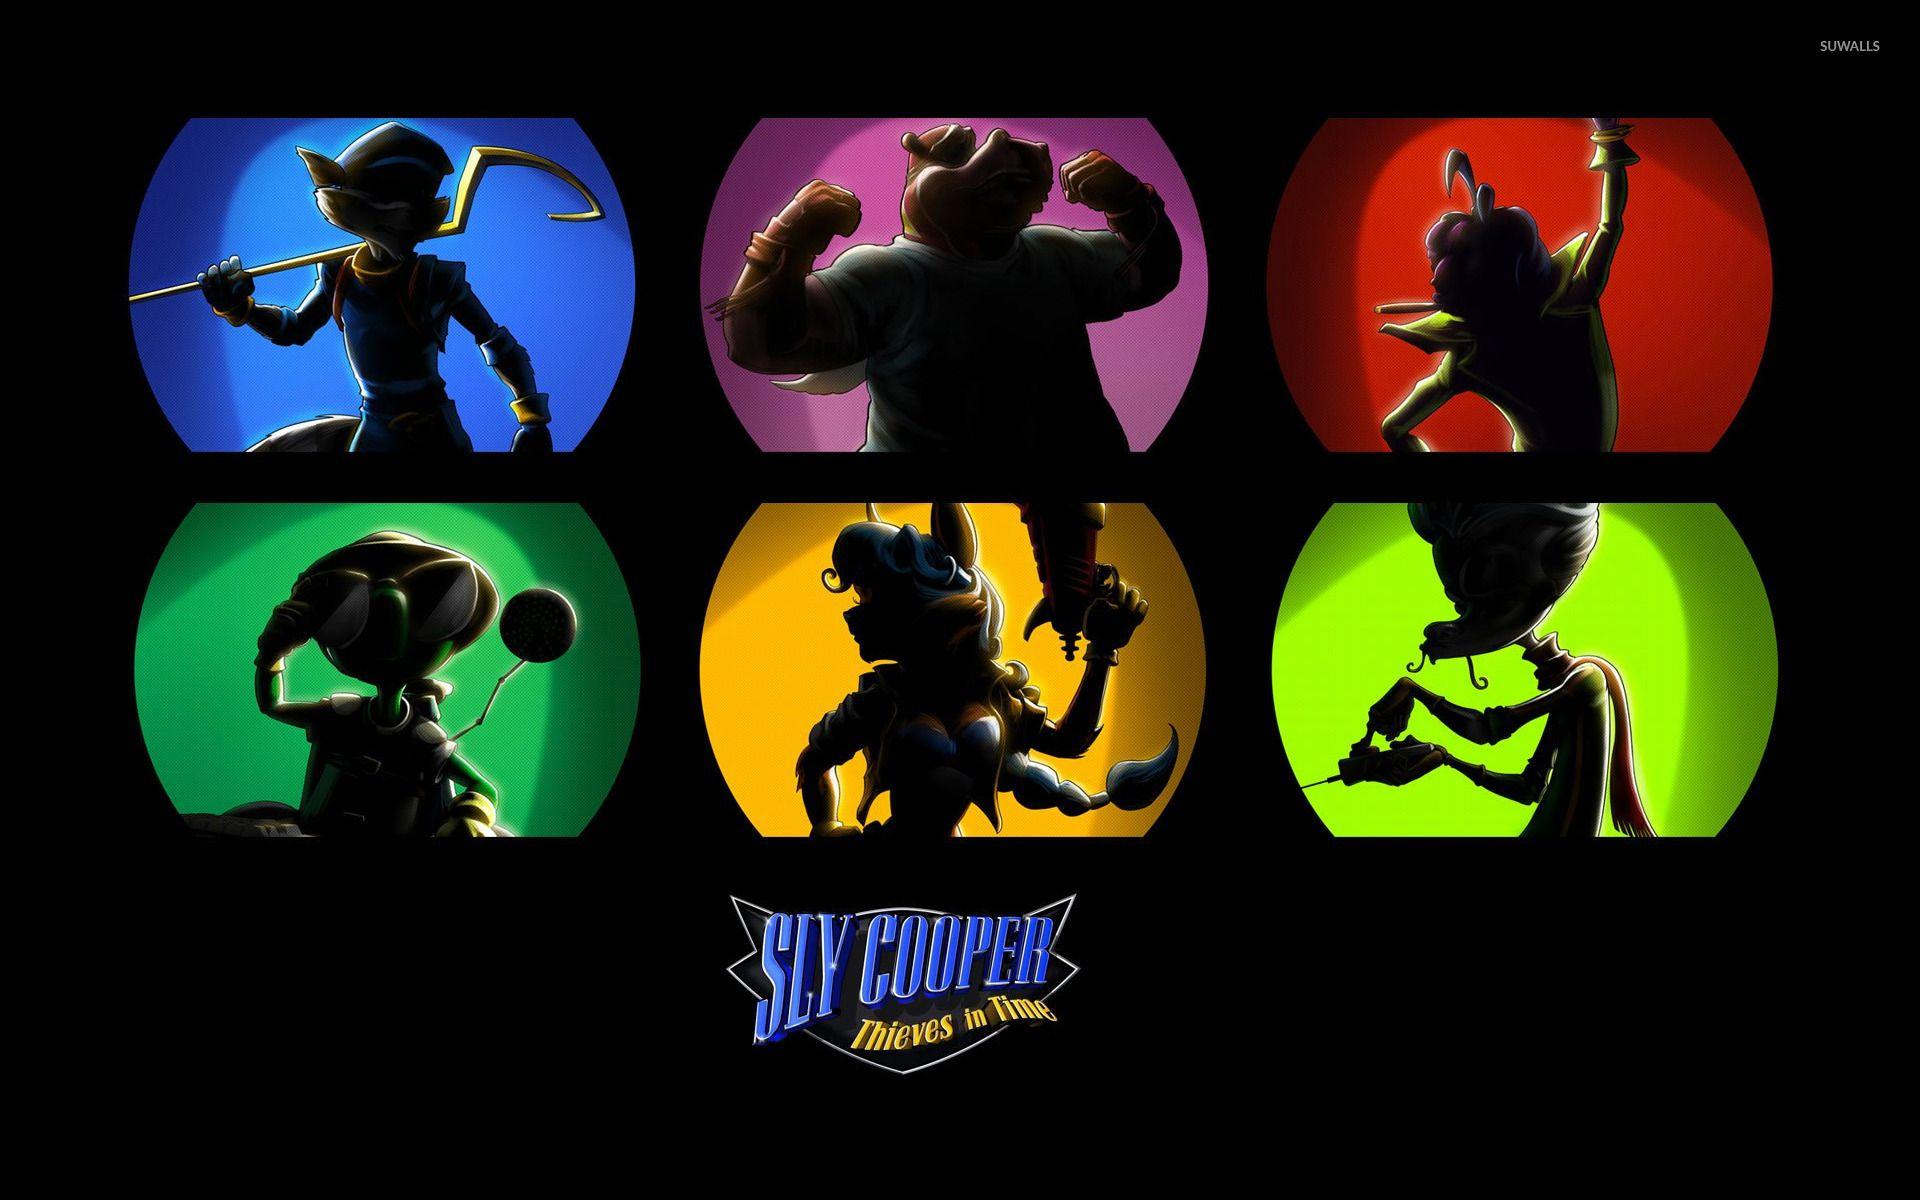 Sly Cooper: Thieves in Time [5] wallpaper wallpaper